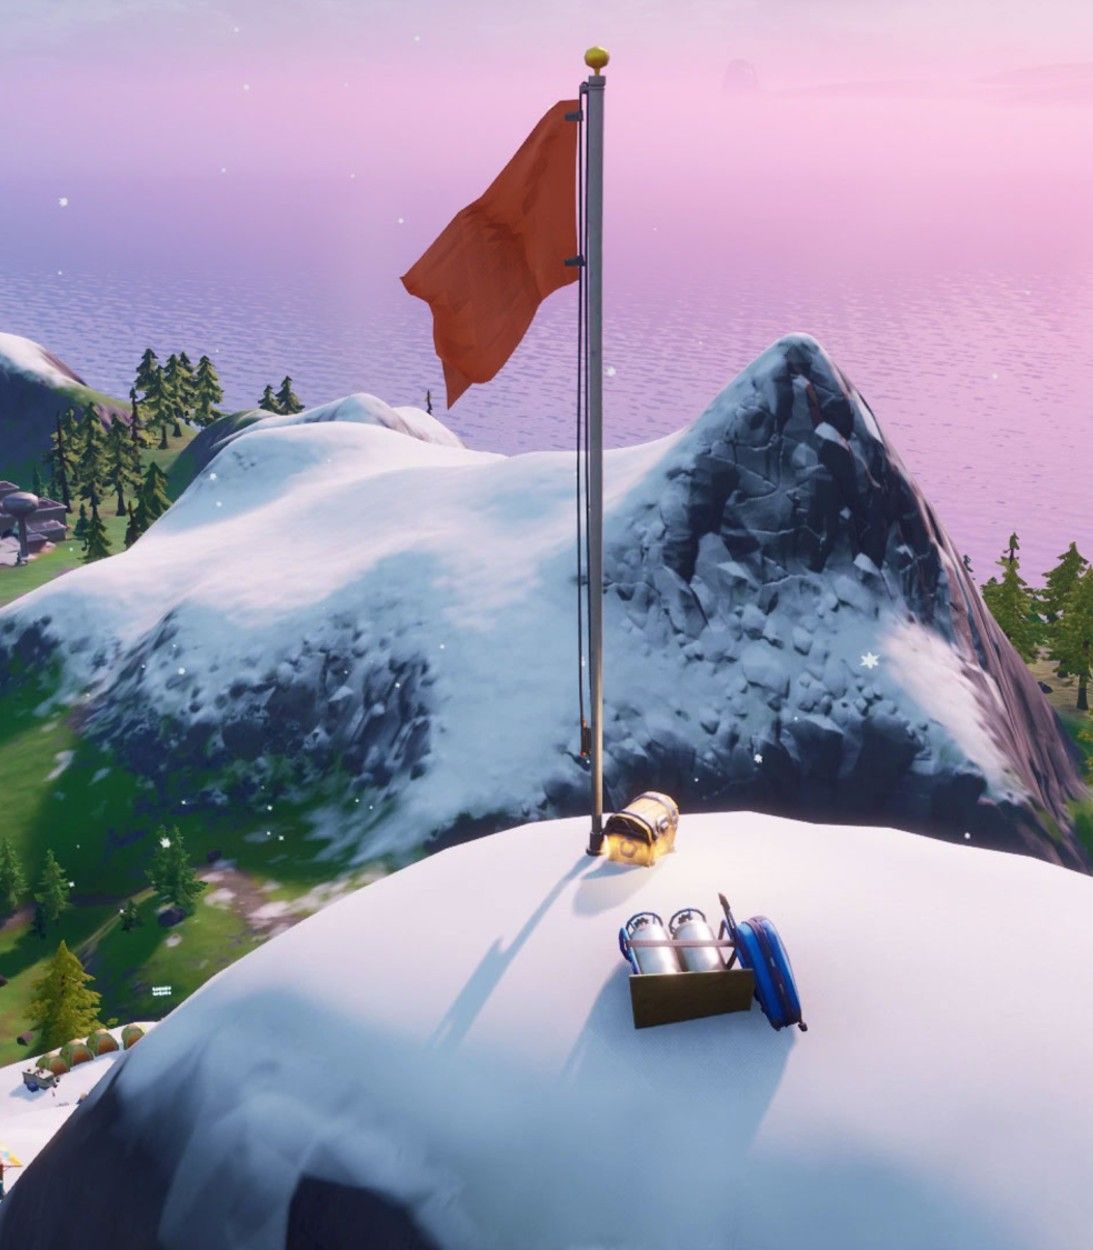 Mount Kay, the tallest point in Fortnite, with a flag